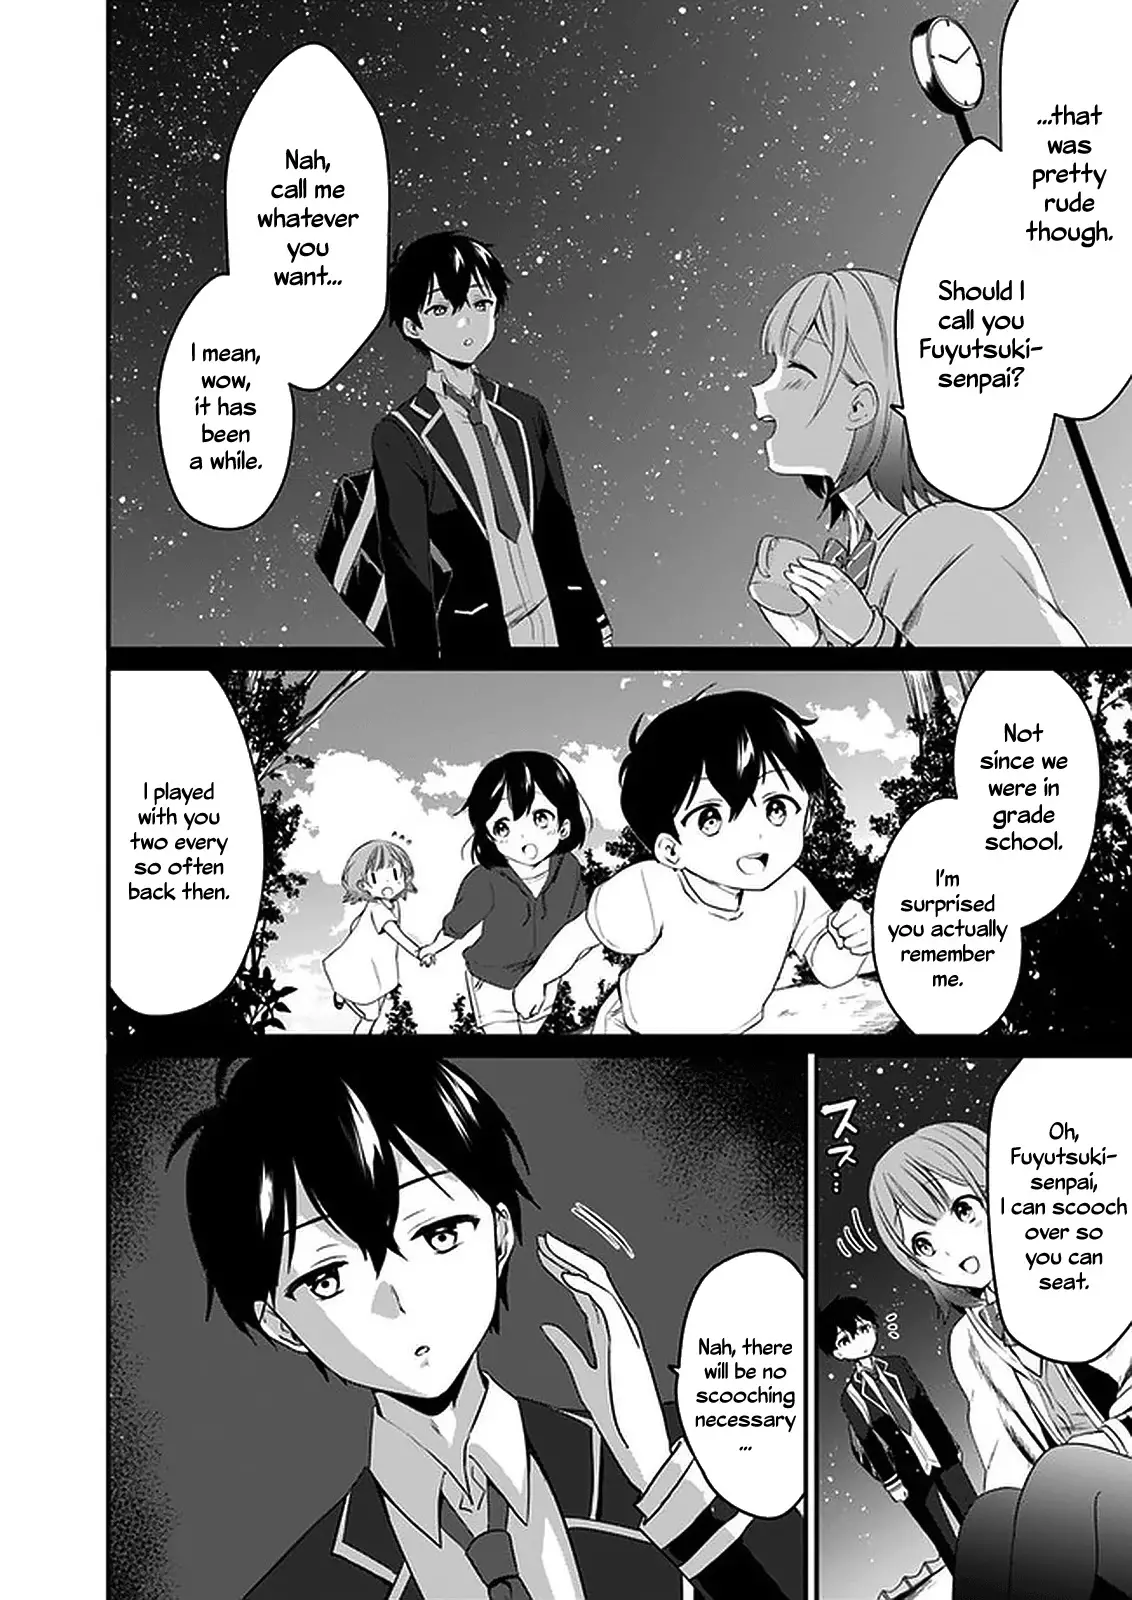 Right Now, She's Still My Childhood Friend's Sister. - 1 page 14